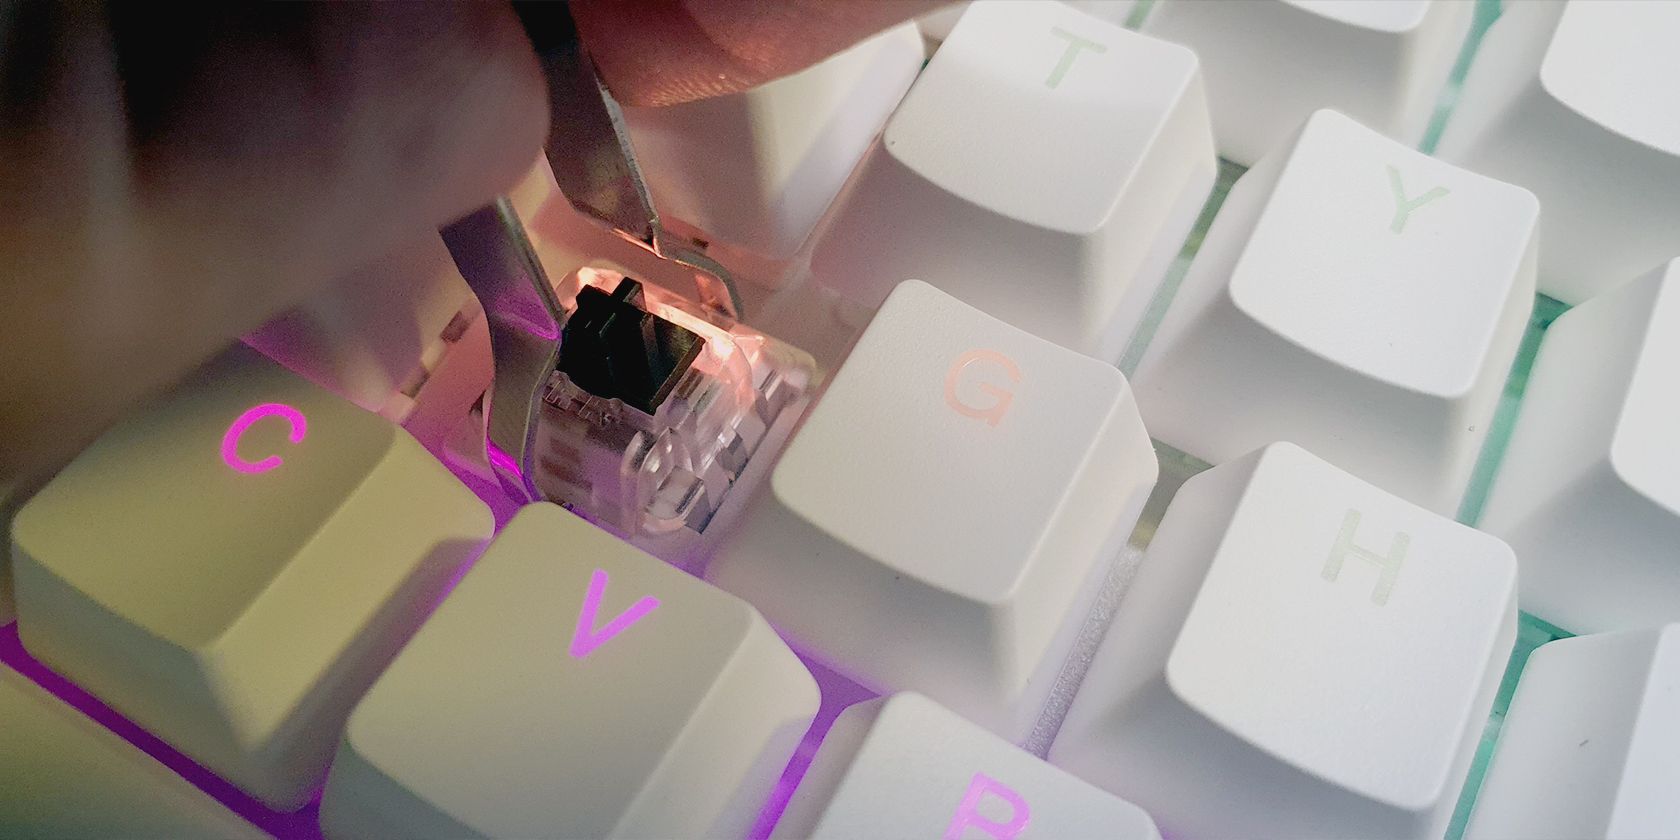 Choosing the Right Switch for Your Keyboard: Linear Vs. Tactile Vs. Clicky  